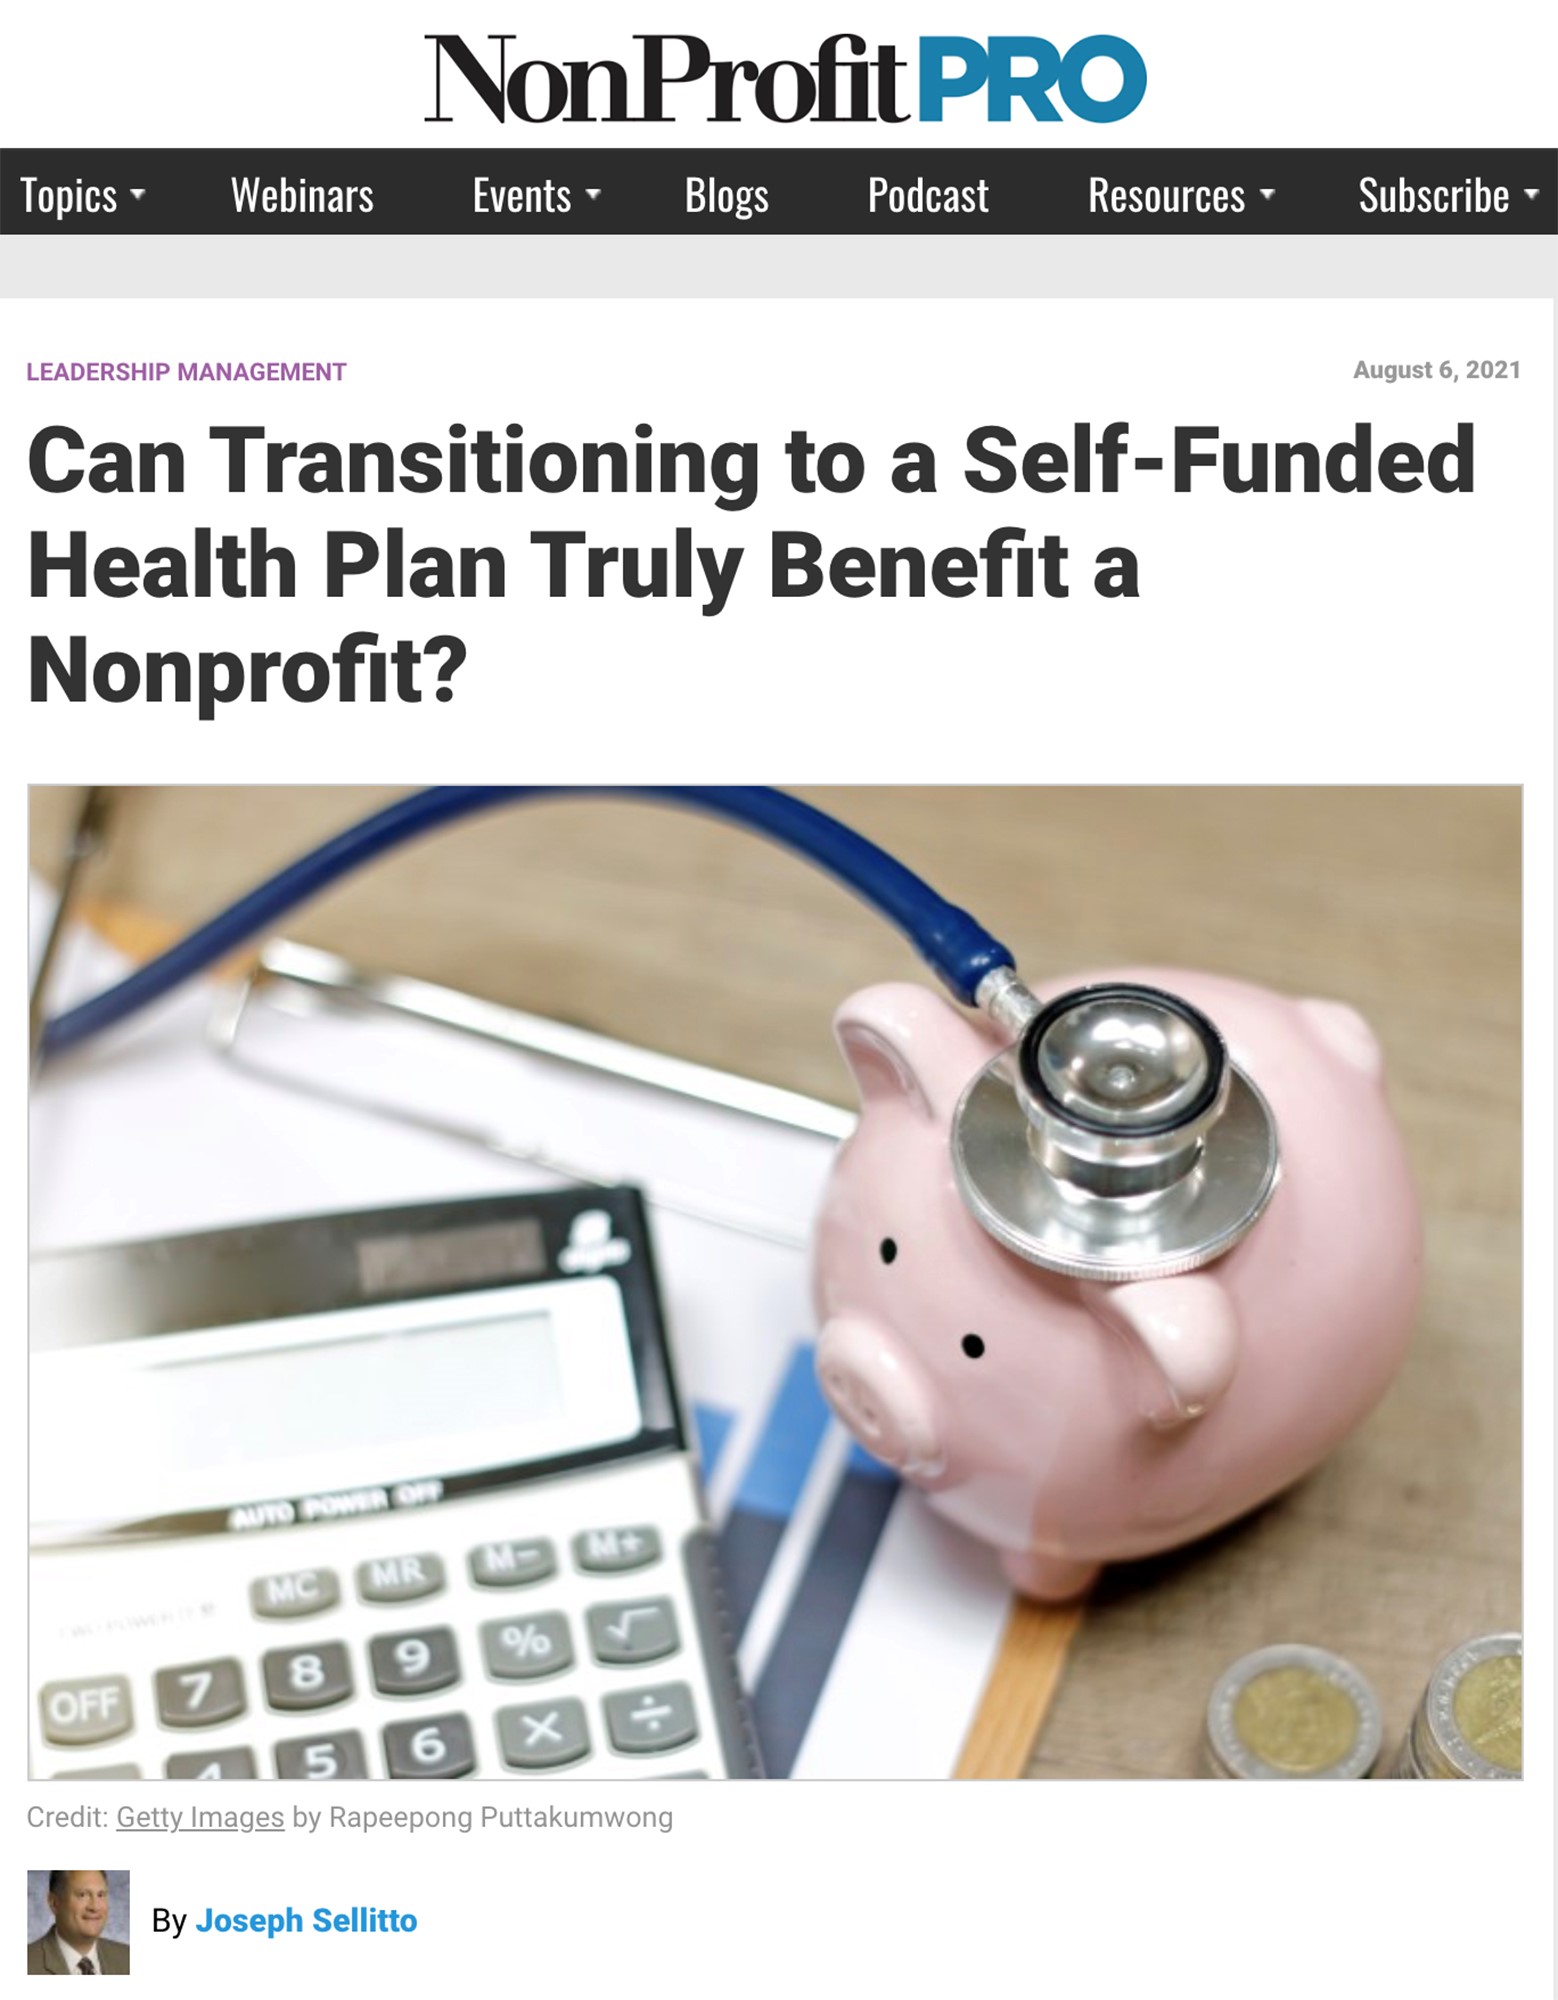 svp-joe-sellitto-pens-an-article-on-self-funded-plans-for-nonprofit-pro